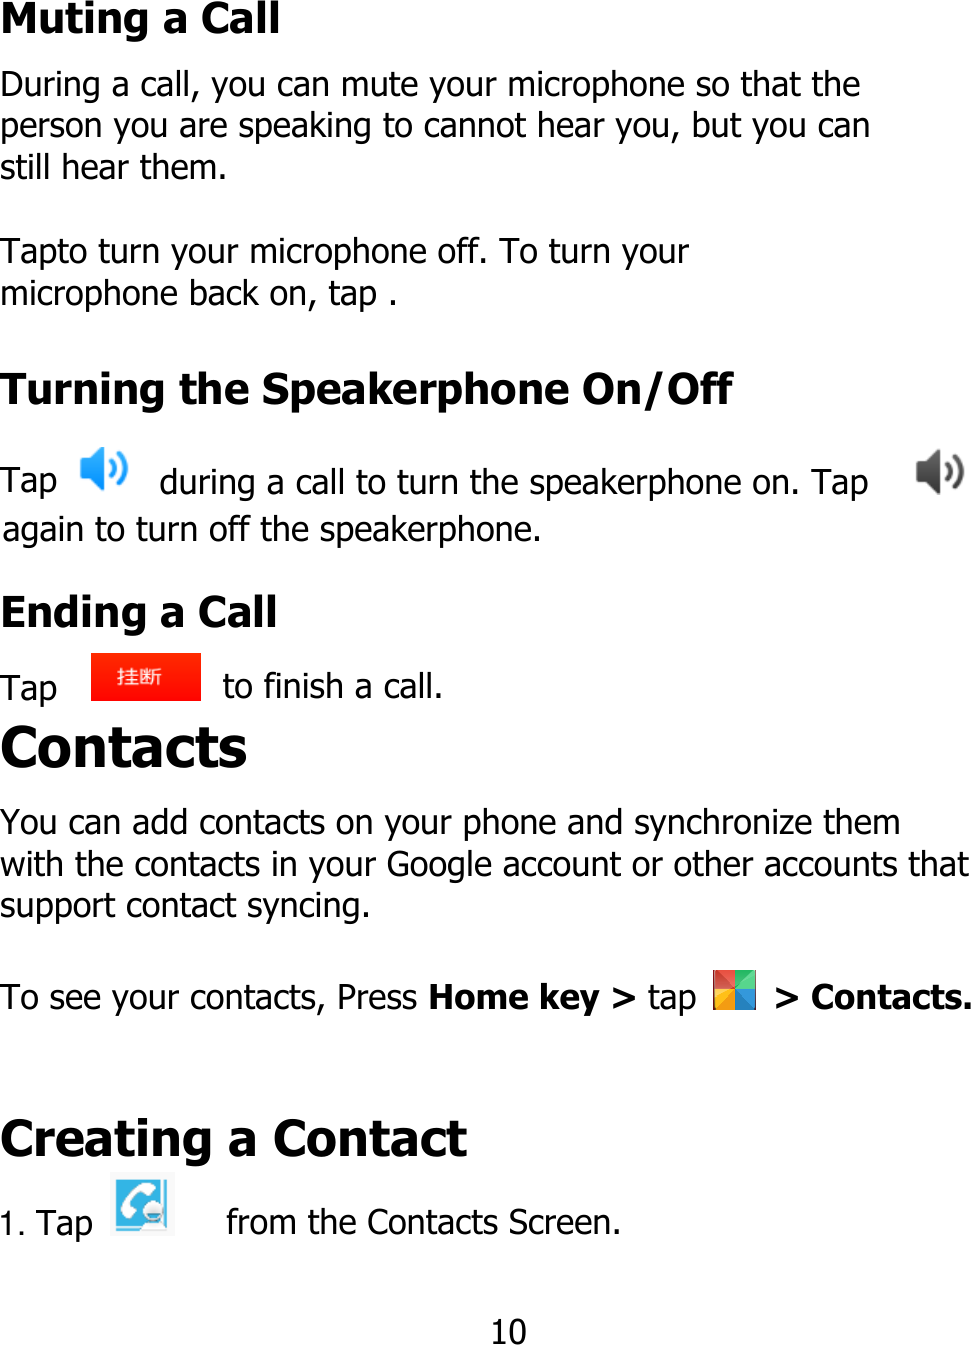 Muting a Call During a call, you can mute your microphone so that the person you are speaking to cannot hear you, but you can still hear them. Tapto turn your microphone off. To turn your microphone back on, tap . Turning the Speakerphone On/Off Tap   during a call to turn the speakerphone on. Tap    again to turn off the speakerphone. Ending a Call Tap    Contacts to finish a call. You can add contacts on your phone and synchronize them with the contacts in your Google account or other accounts that support contact syncing. To see your contacts, Press Home key &gt; tap    &gt; Contacts. Creating a Contact 1. Tap   from the Contacts Screen. 10 